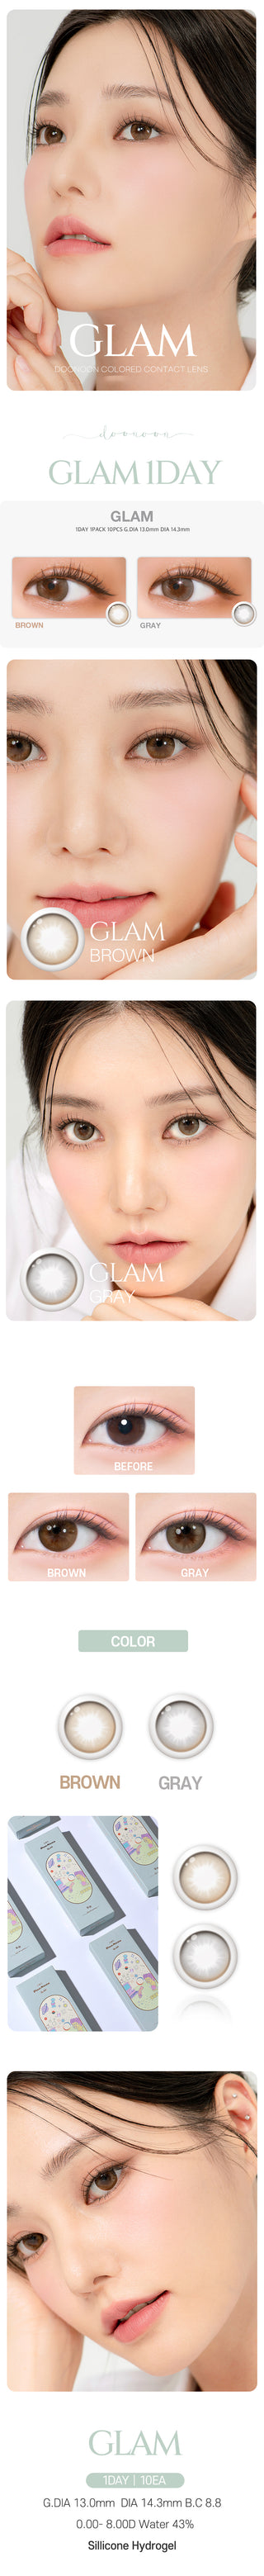 DooNoon Glam 1-Day Grey (10pk) Colored Contacts Circle Lenses - EyeCandys